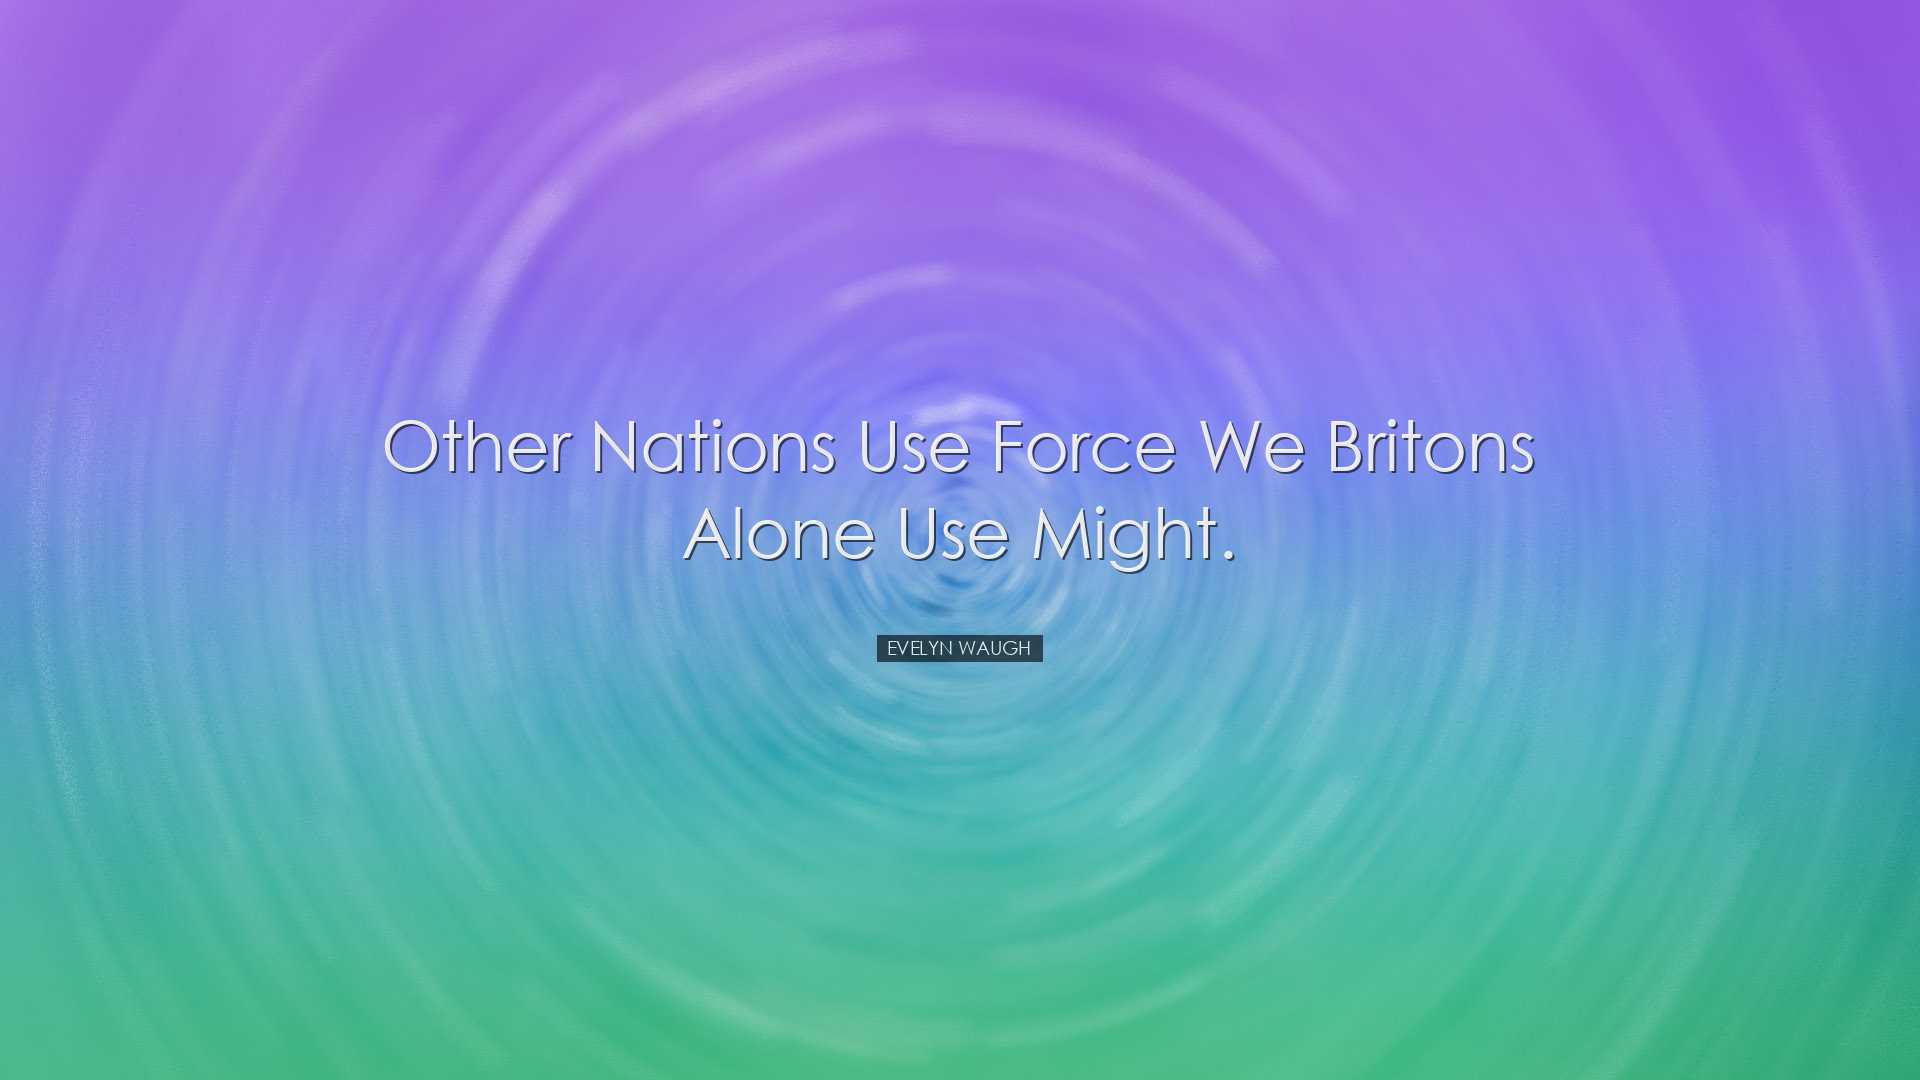 Other nations use force we Britons alone use Might. - Evelyn Waugh